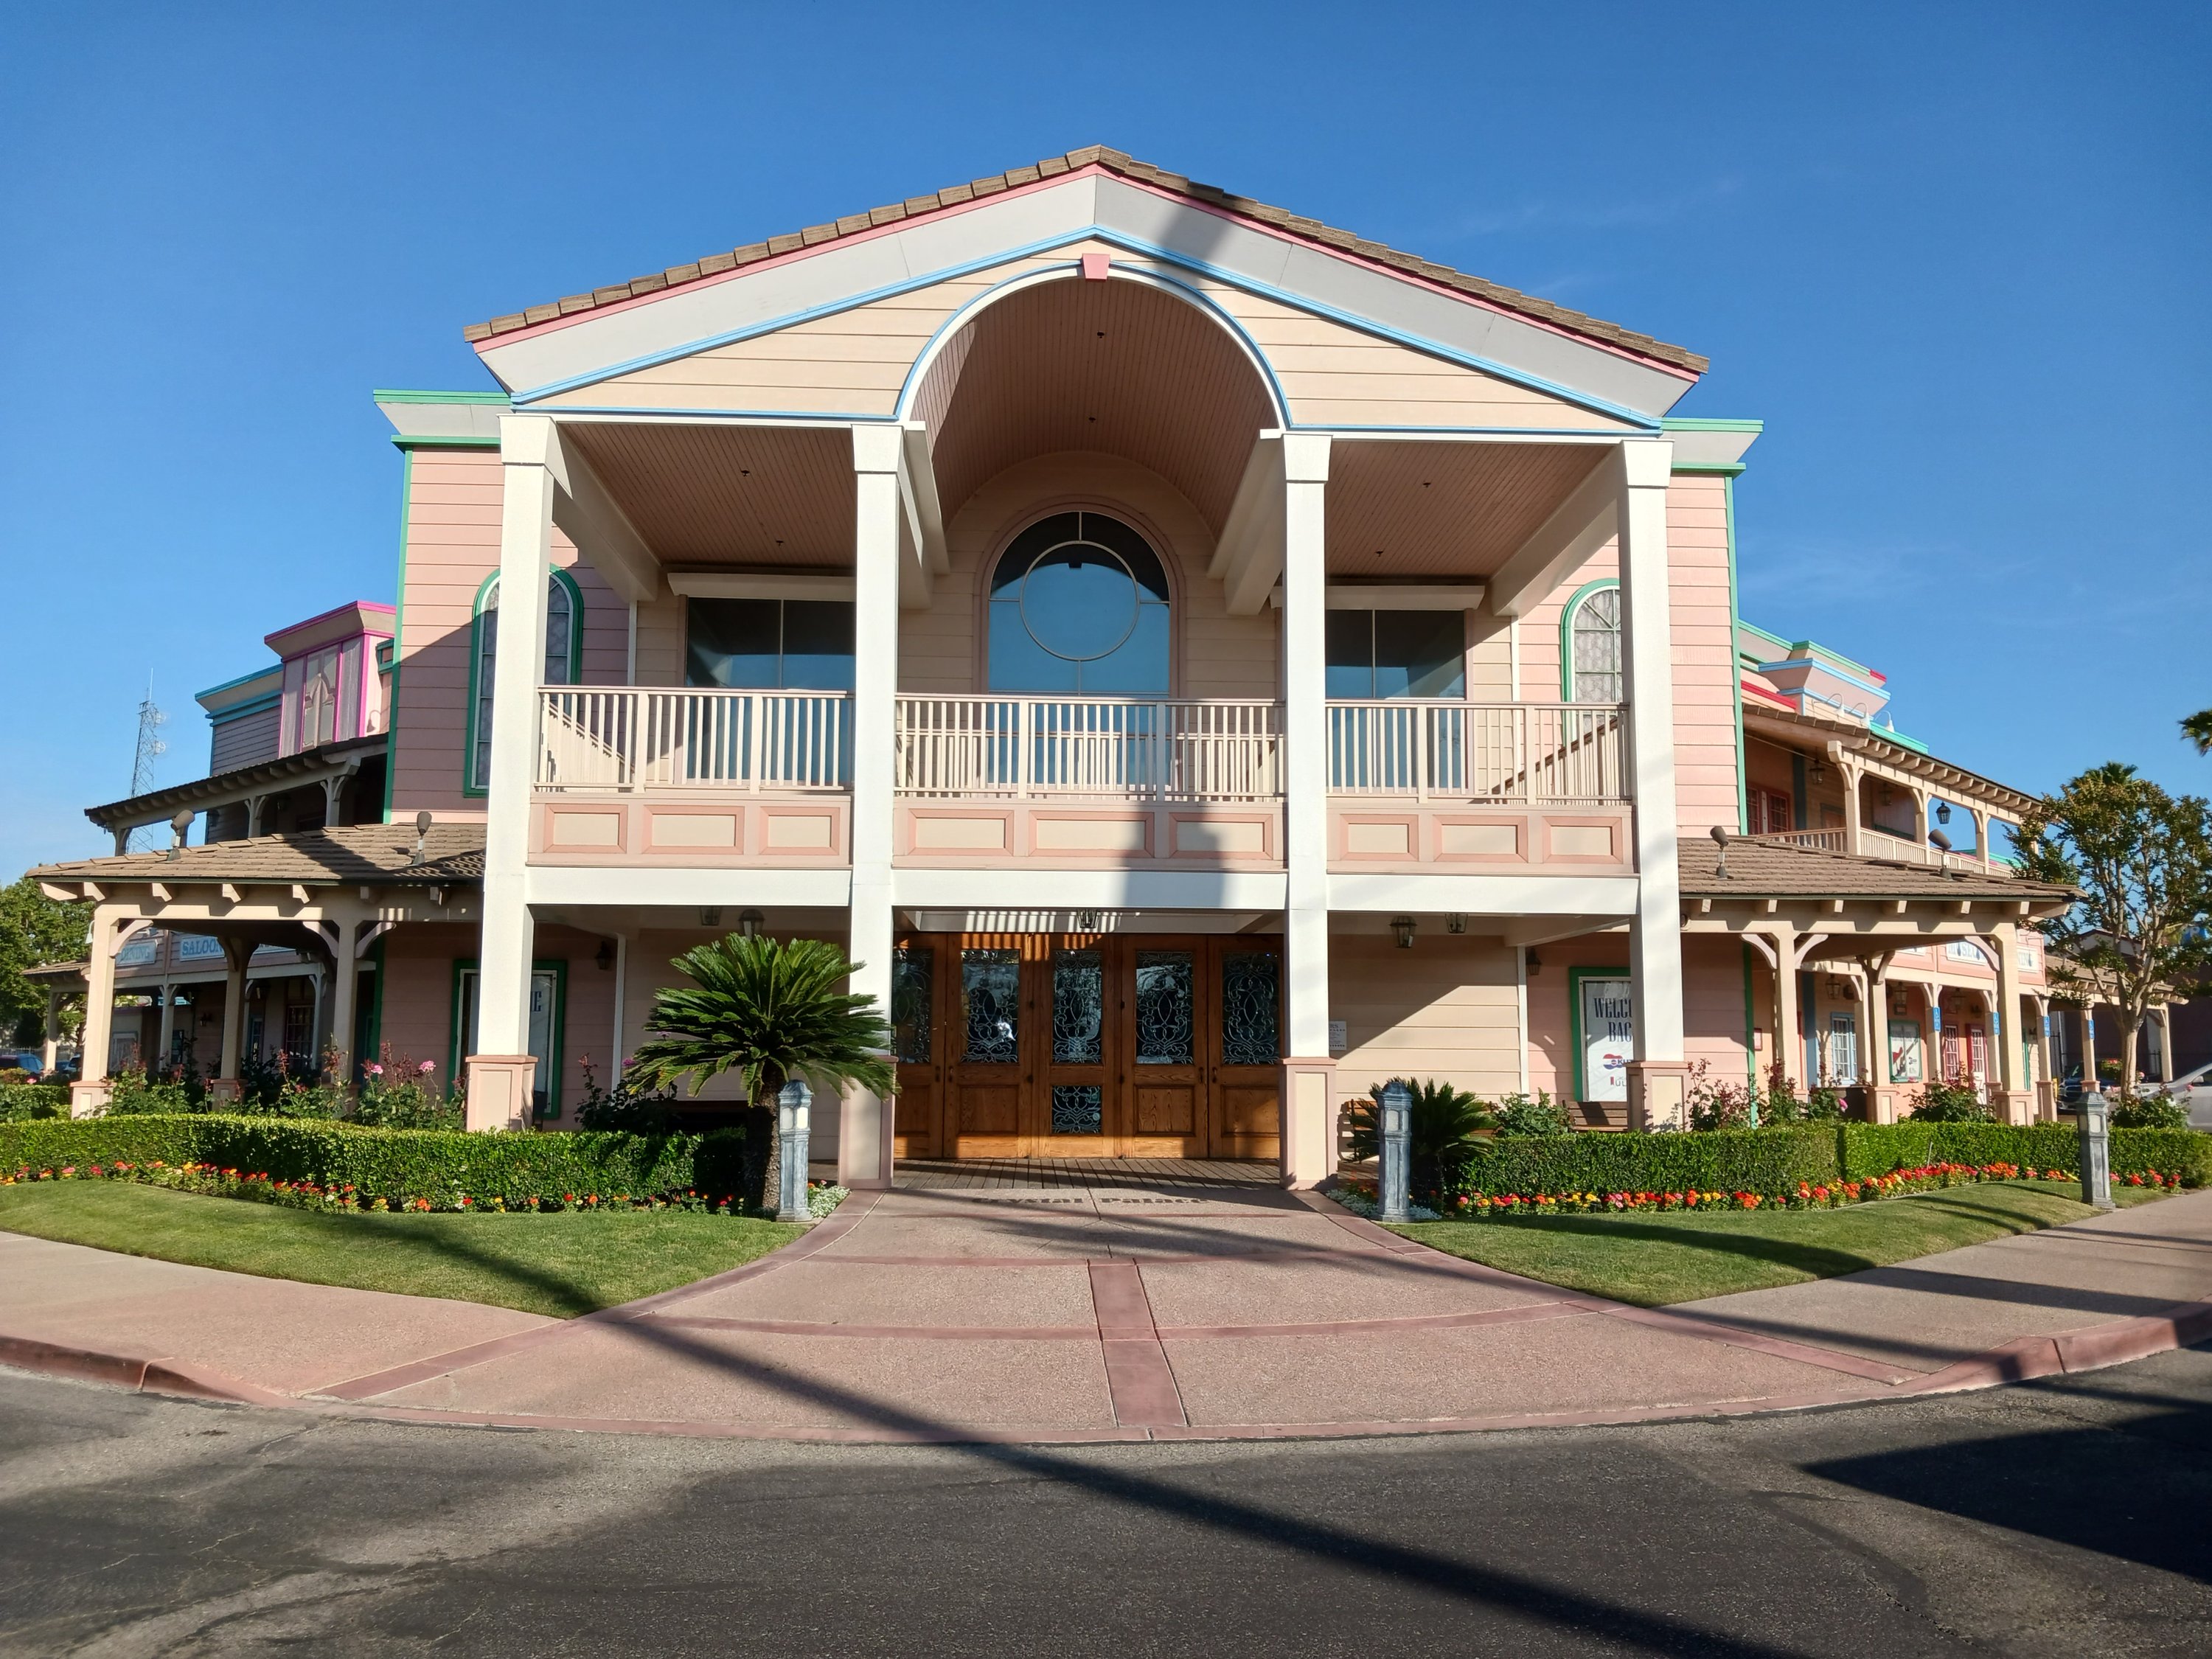 A wooden two-story building in the Western Revival style is bathed in afternoon sunlight. The building is pink and white with light blue trim and features elegant landscaping.